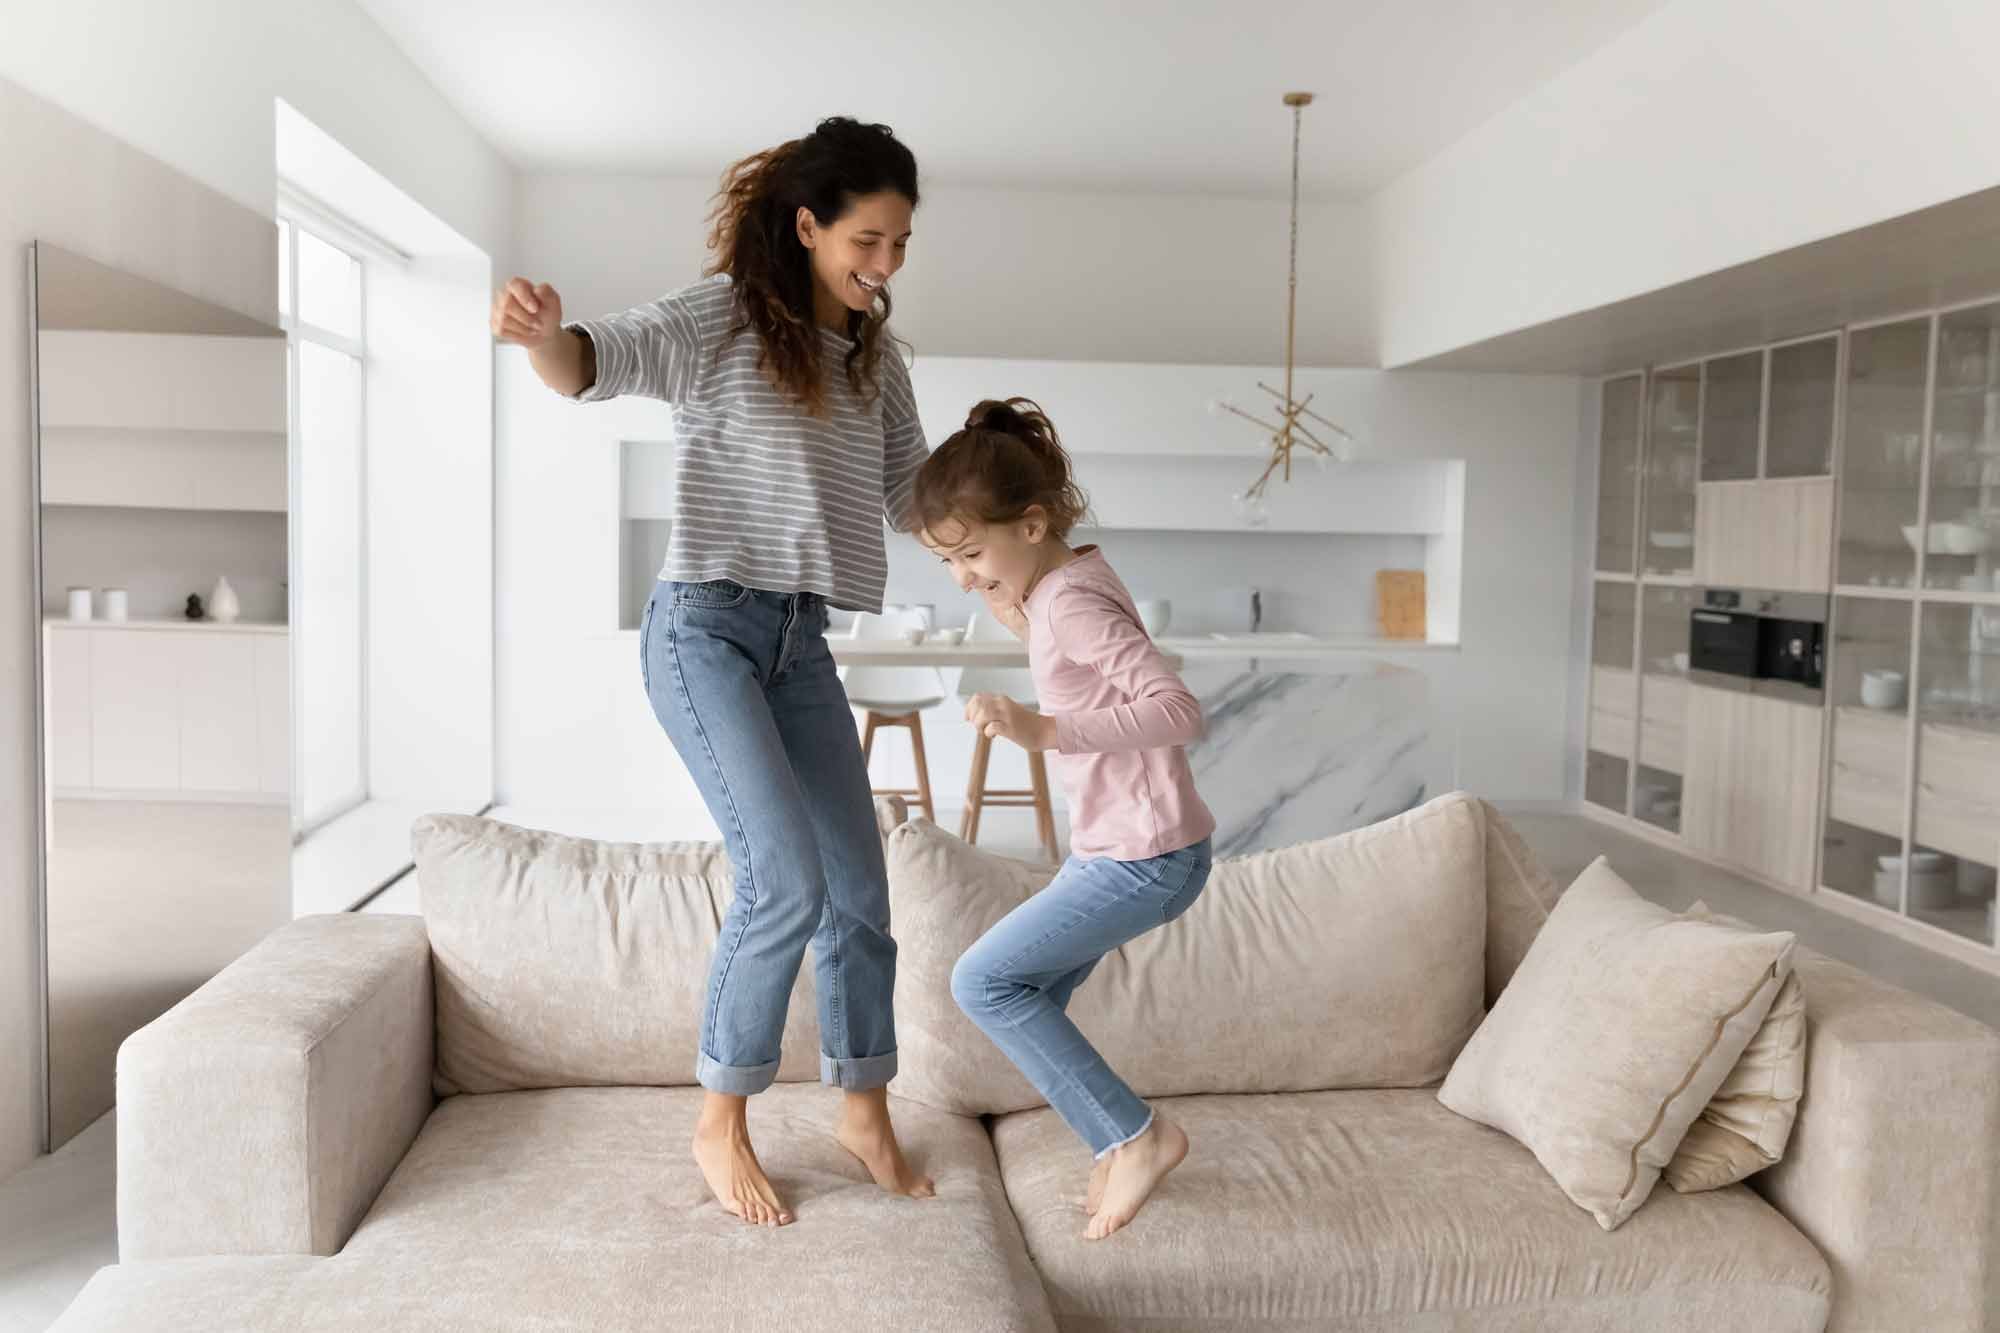 Mom and daughter jumping on the couch